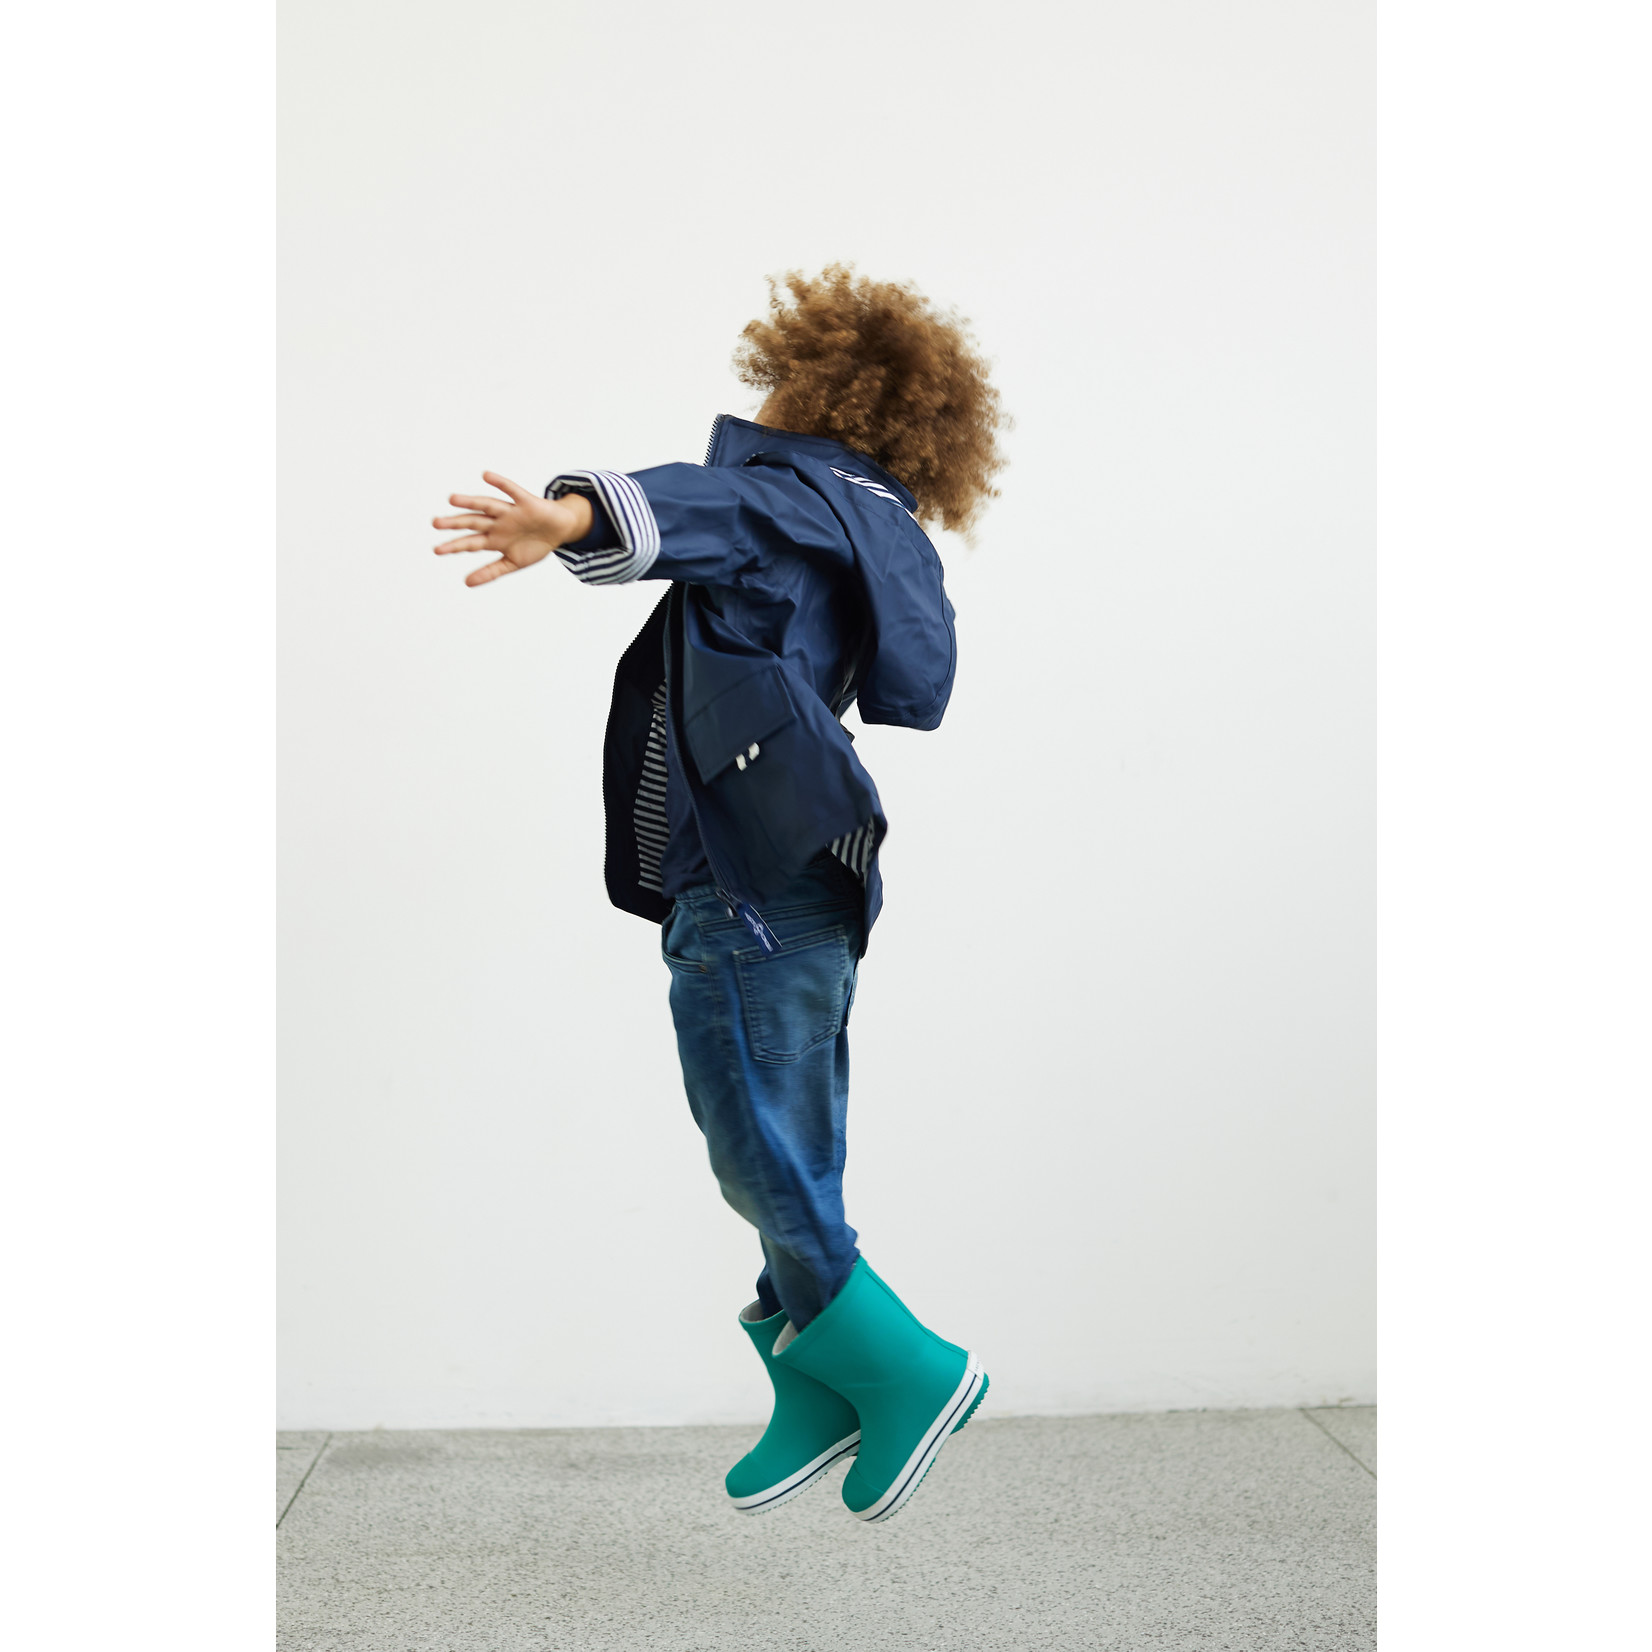 French Soda Gumboots Sea Green